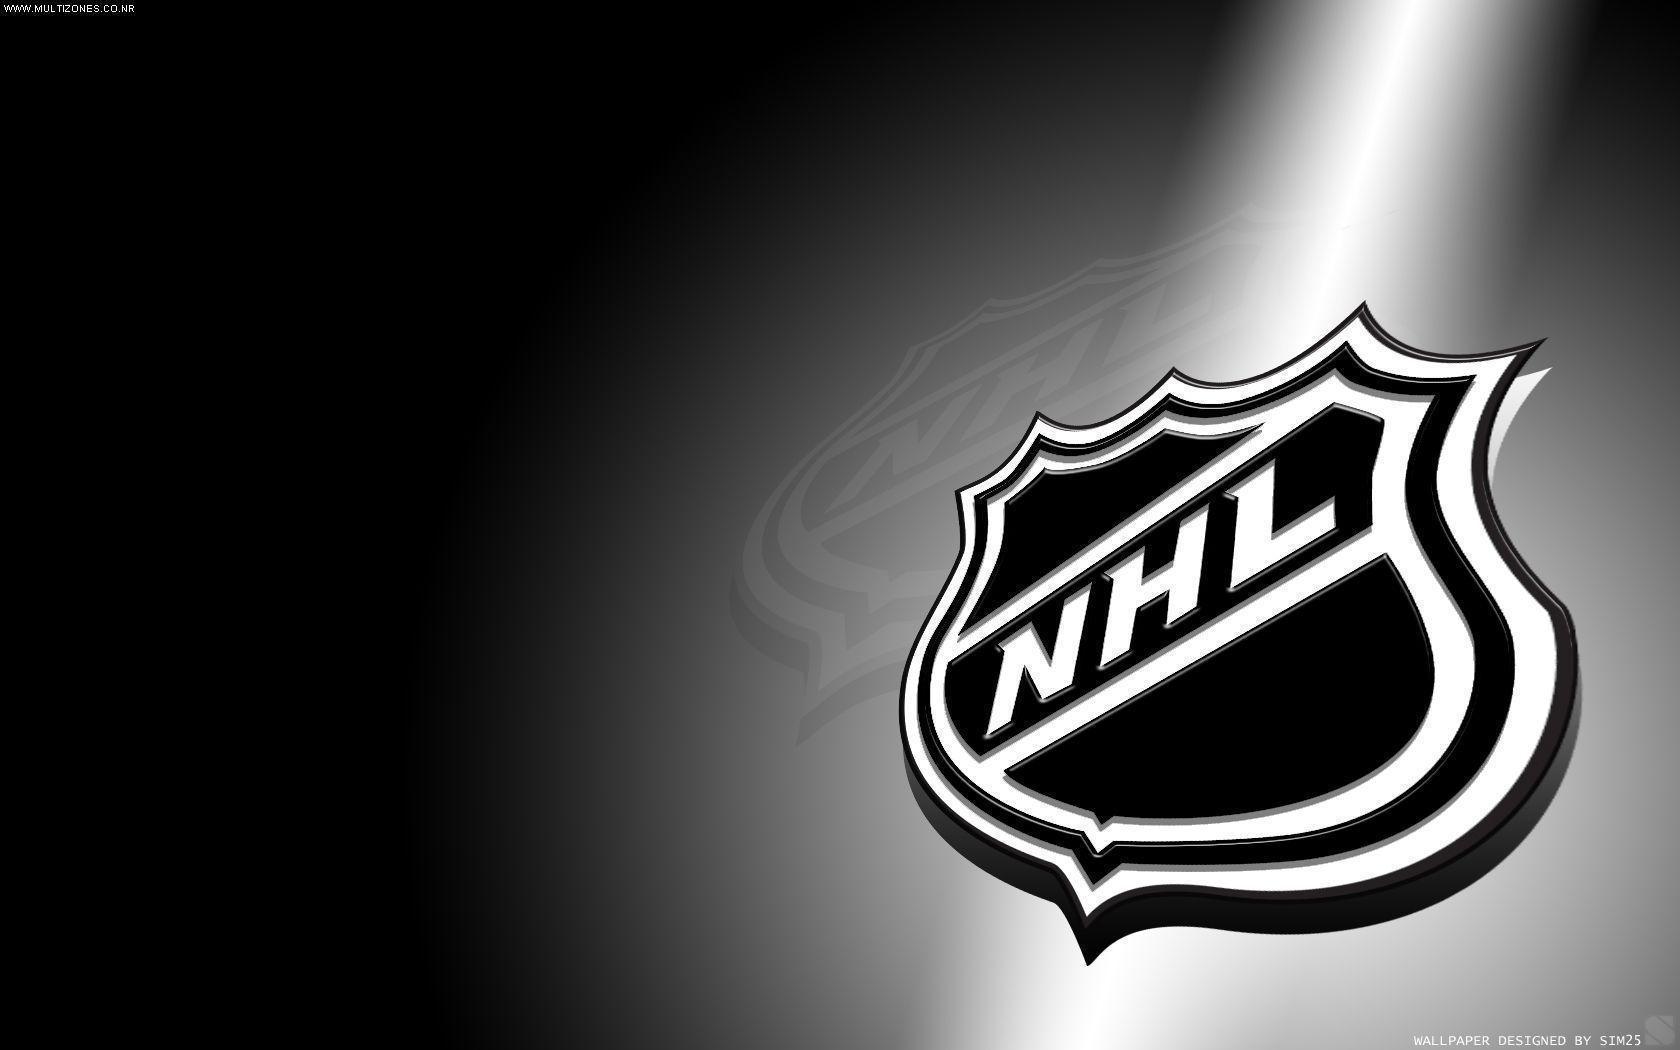 nhl wallpaper 6 - Image And Wallpaper free to download